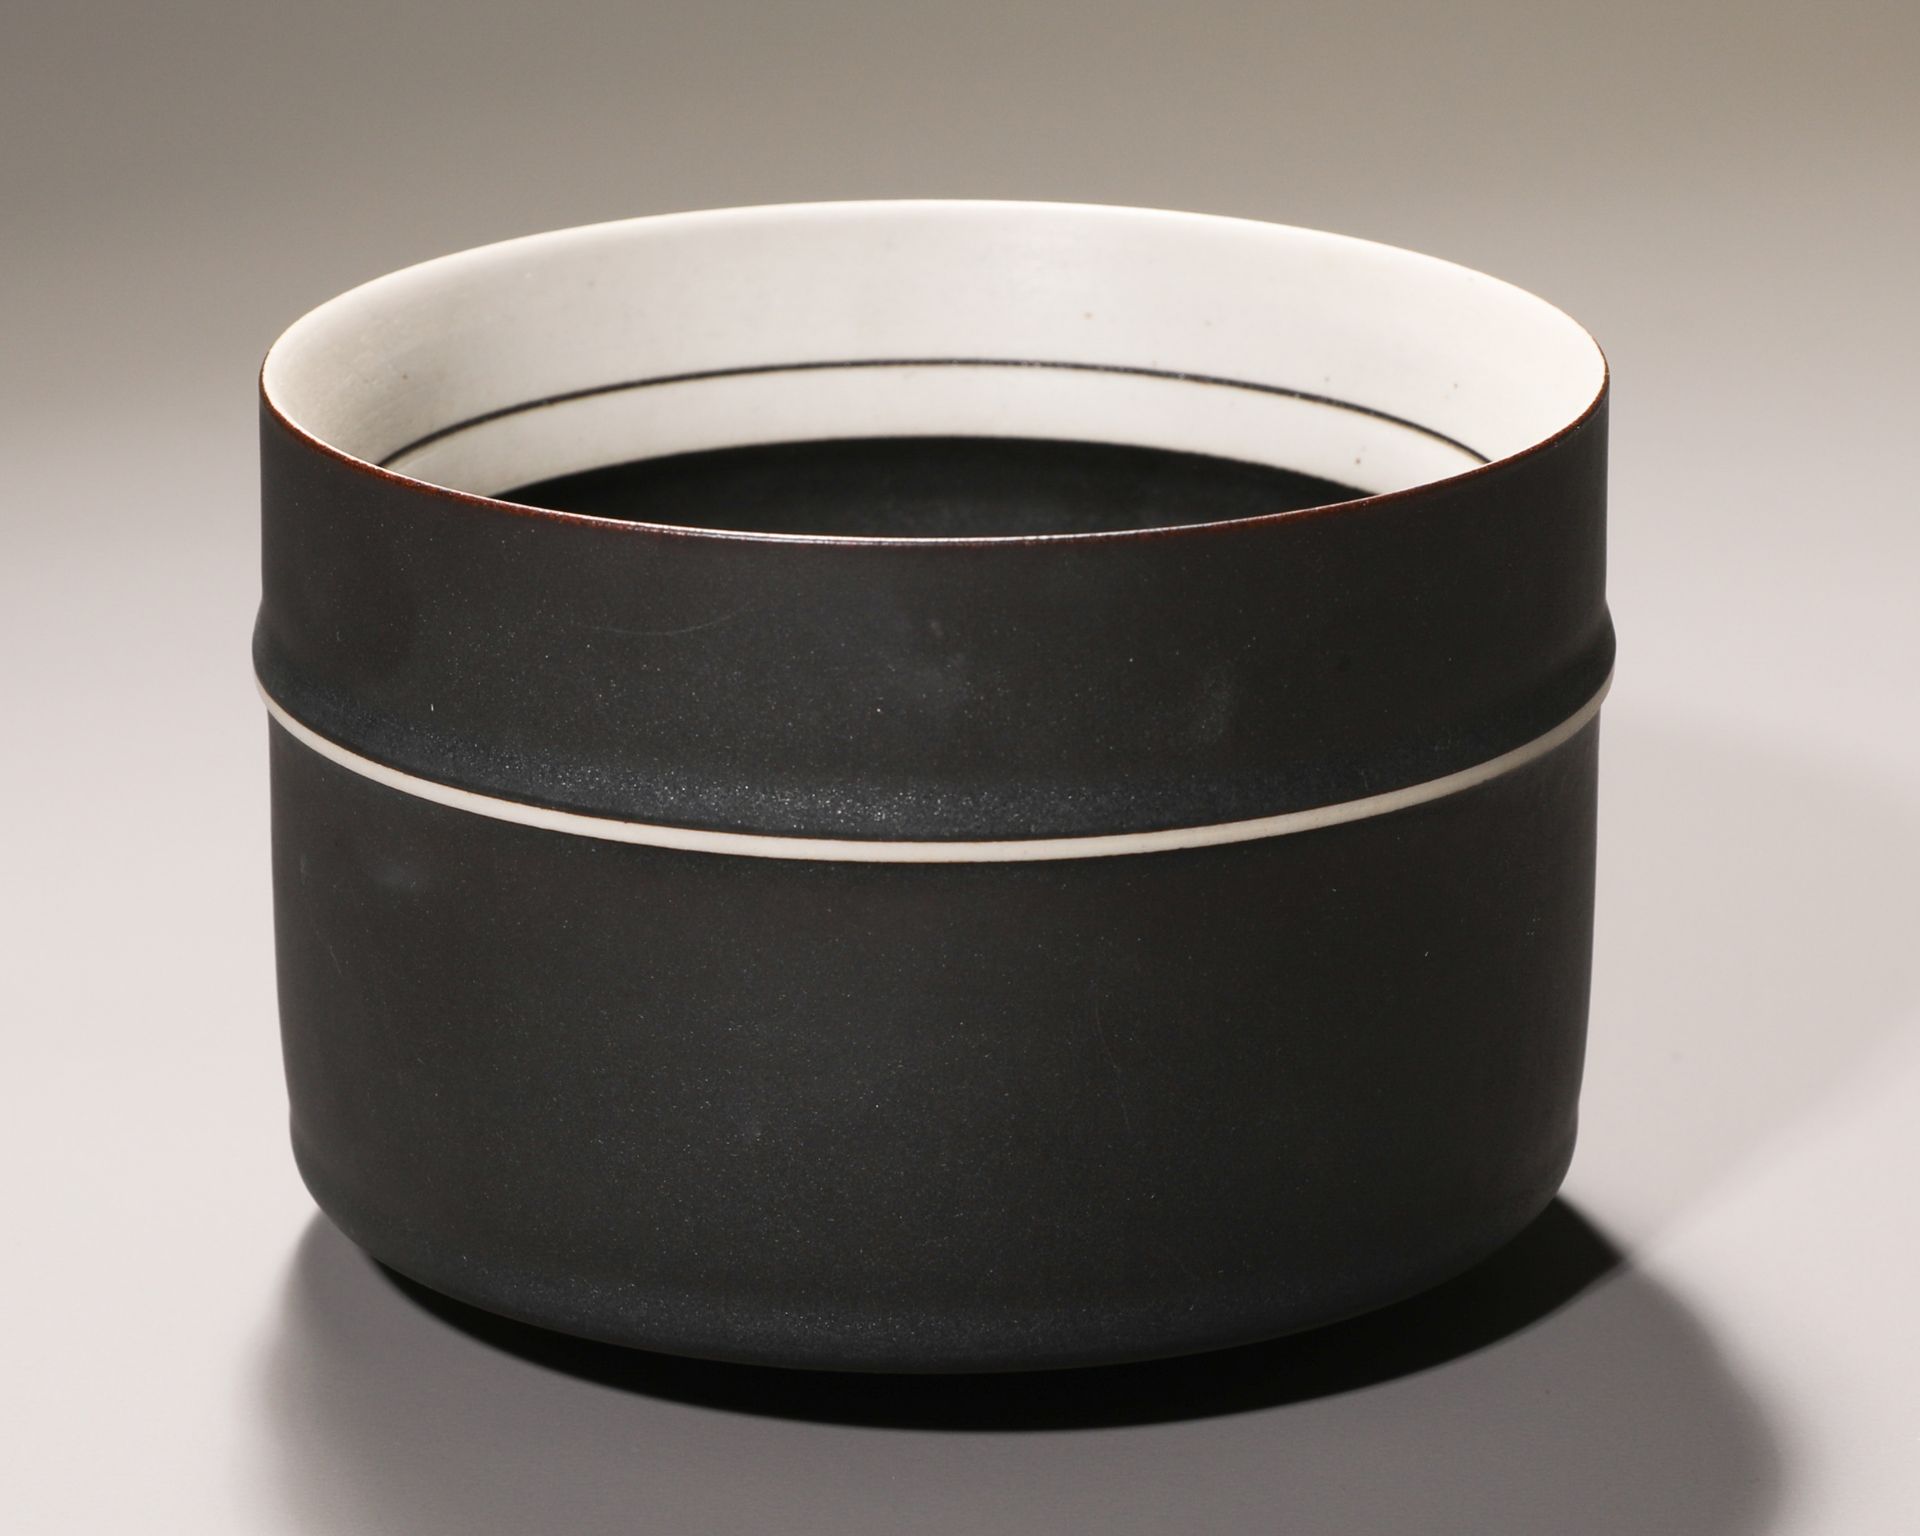 Ursula and Karl Scheid, Two Bowls, 1981 bzw. 1999 - Image 7 of 10